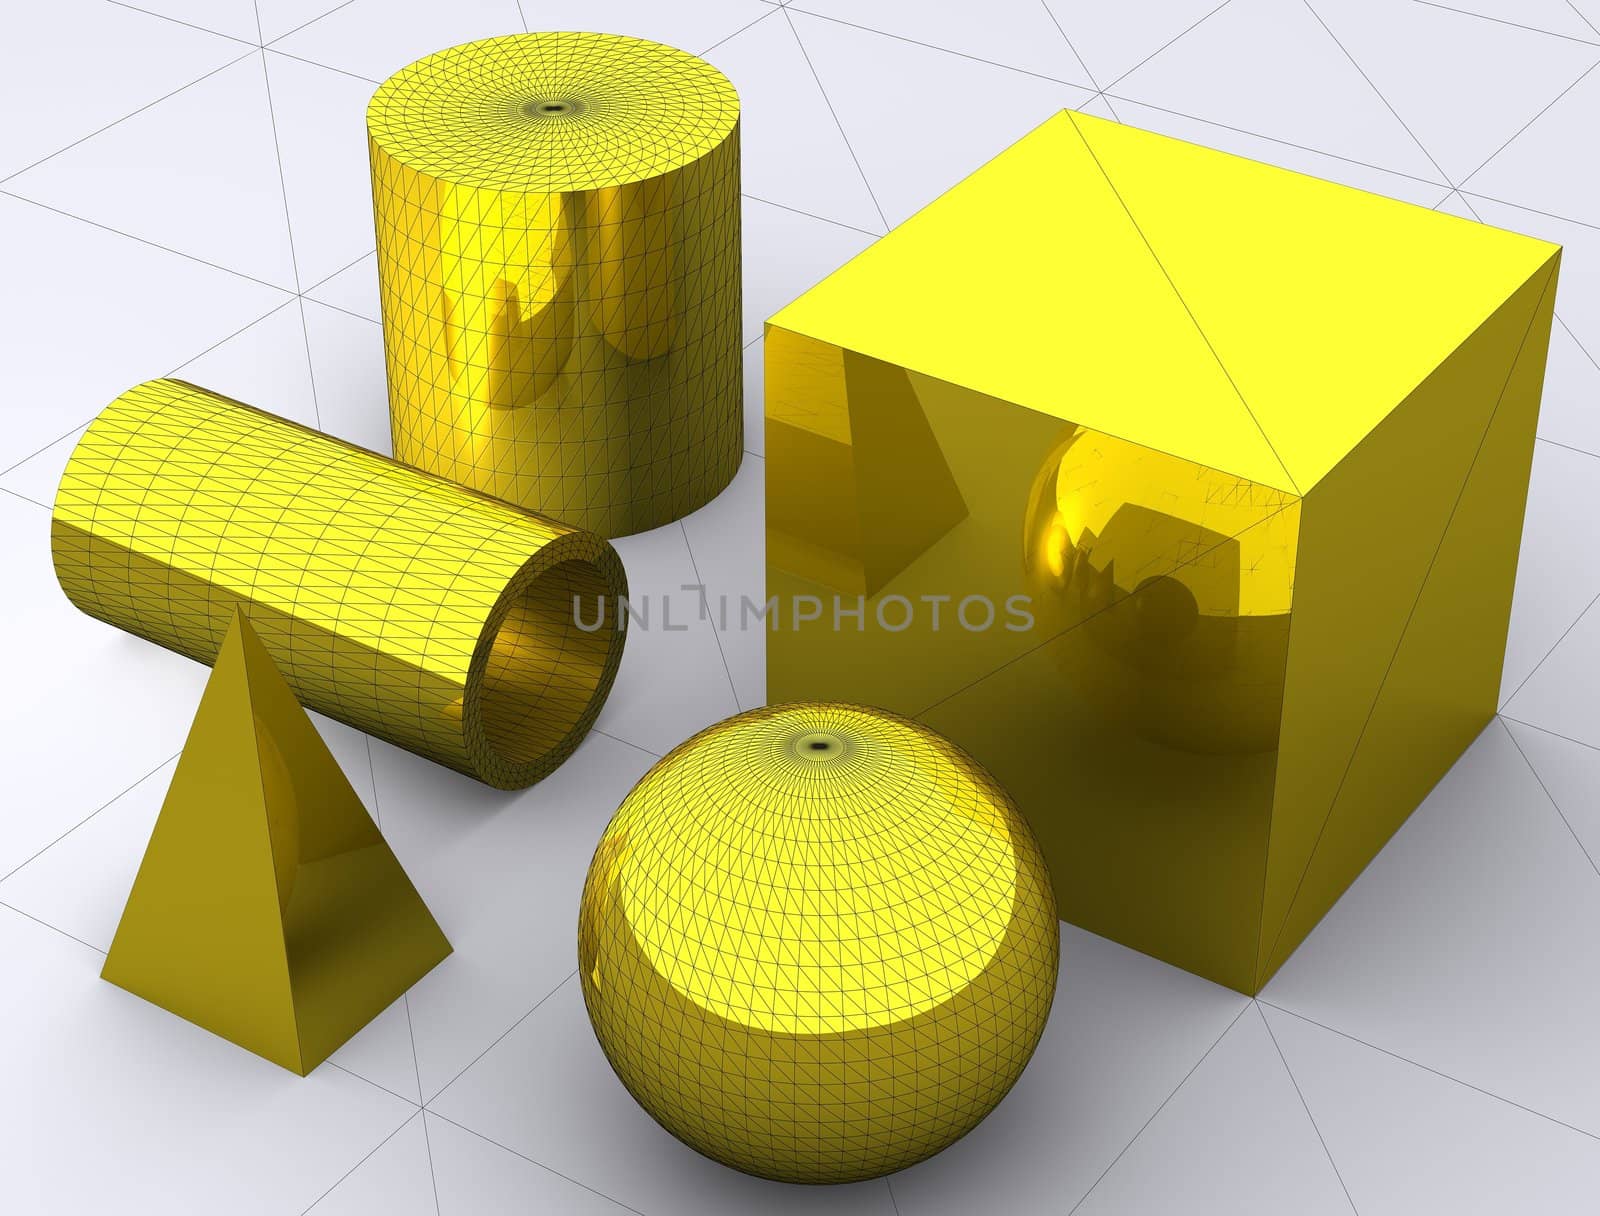 Concept of basic 3d primitives rendered in gold color on white background. 3d concept is highlighted and enhanced by wireframe triangular lines in addition to the solid rendering.